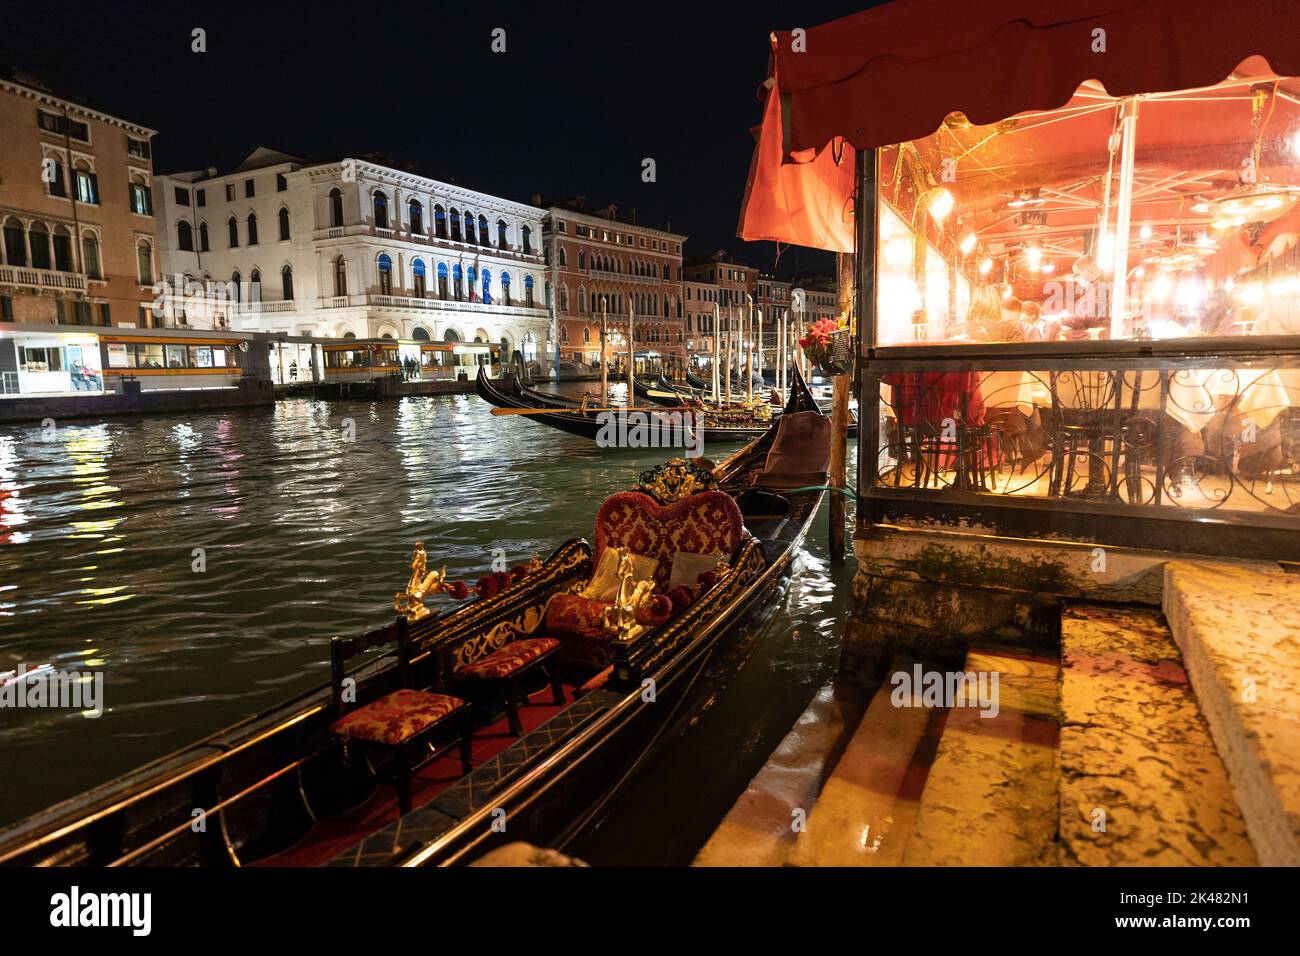 Nighttime at the Grand Canal in the Italian city of Venice Stock Photo